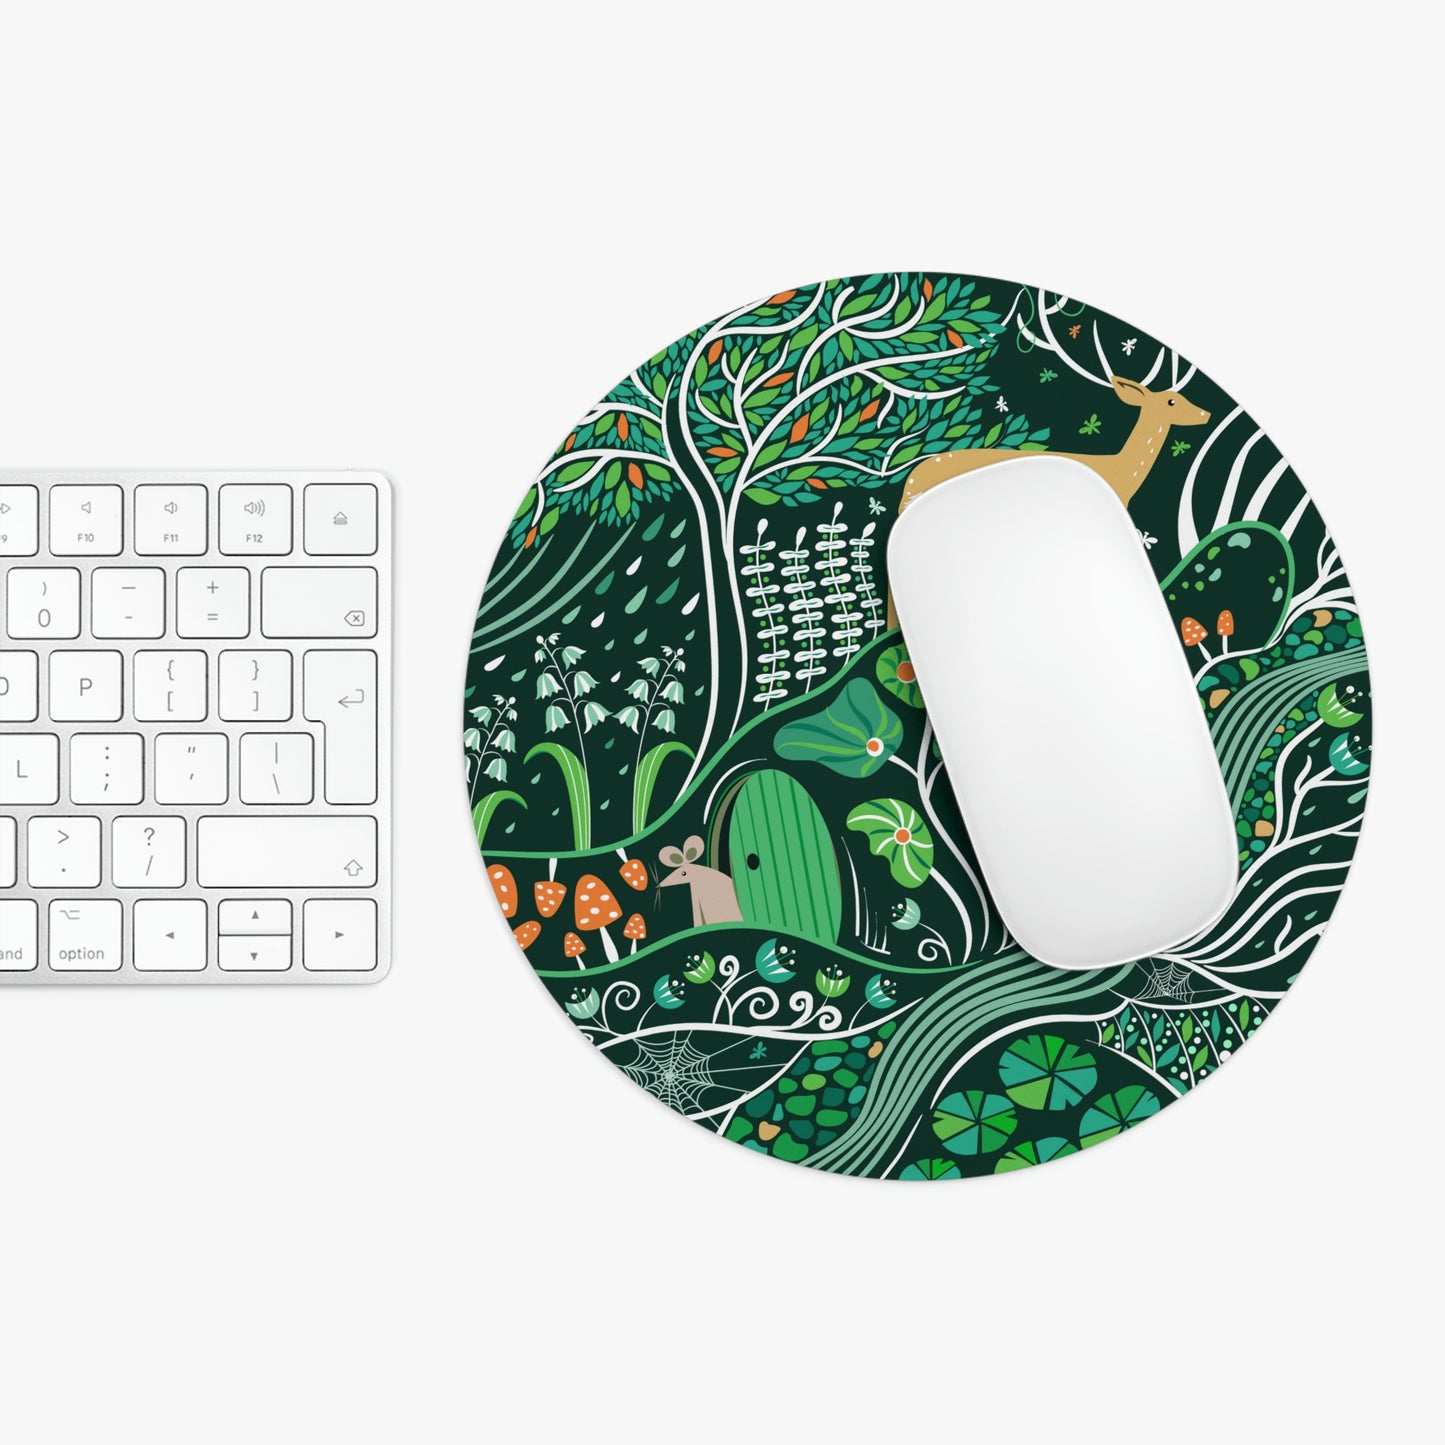 Emerald Forest Mouse Pad